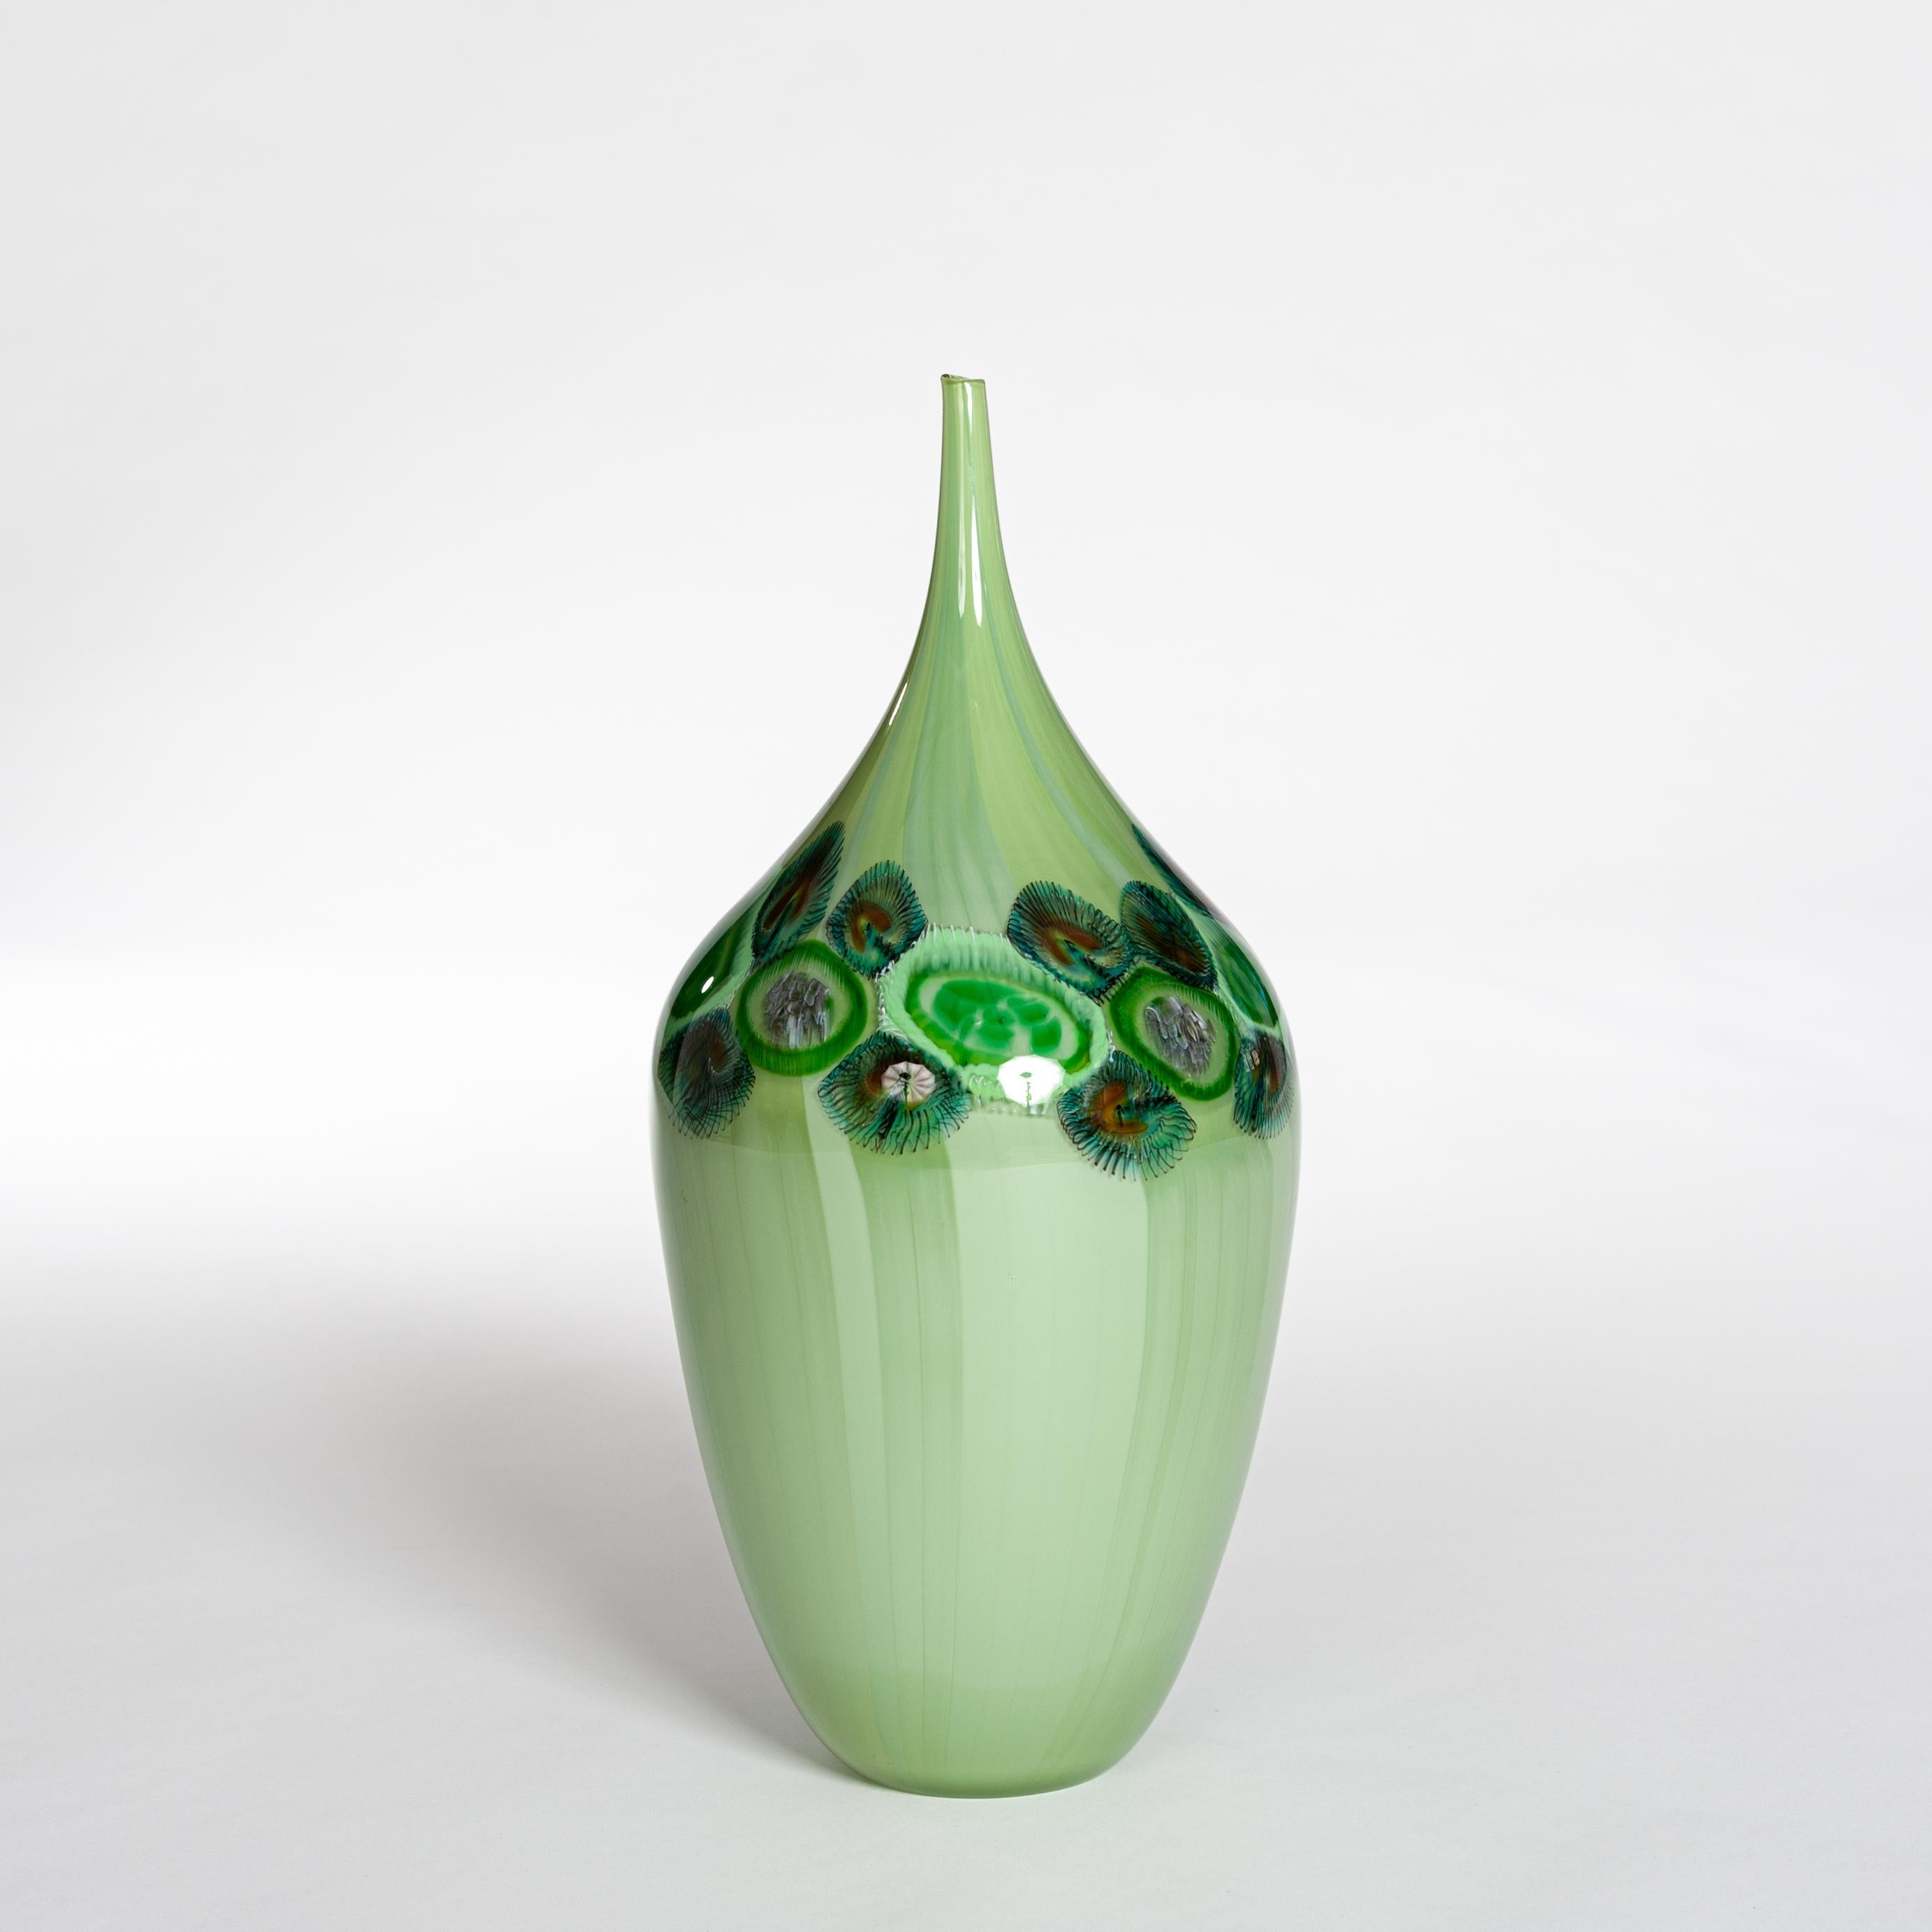 Wonderful lime green Murano glass vase by Afro Celotto. Murrines in emerald green, brown and turquoise.
Very elegant shape, running into a narrow neck.


Afro Celotto was born in Venice, on Burano Island, on August 24, 1963.
Much quieter and